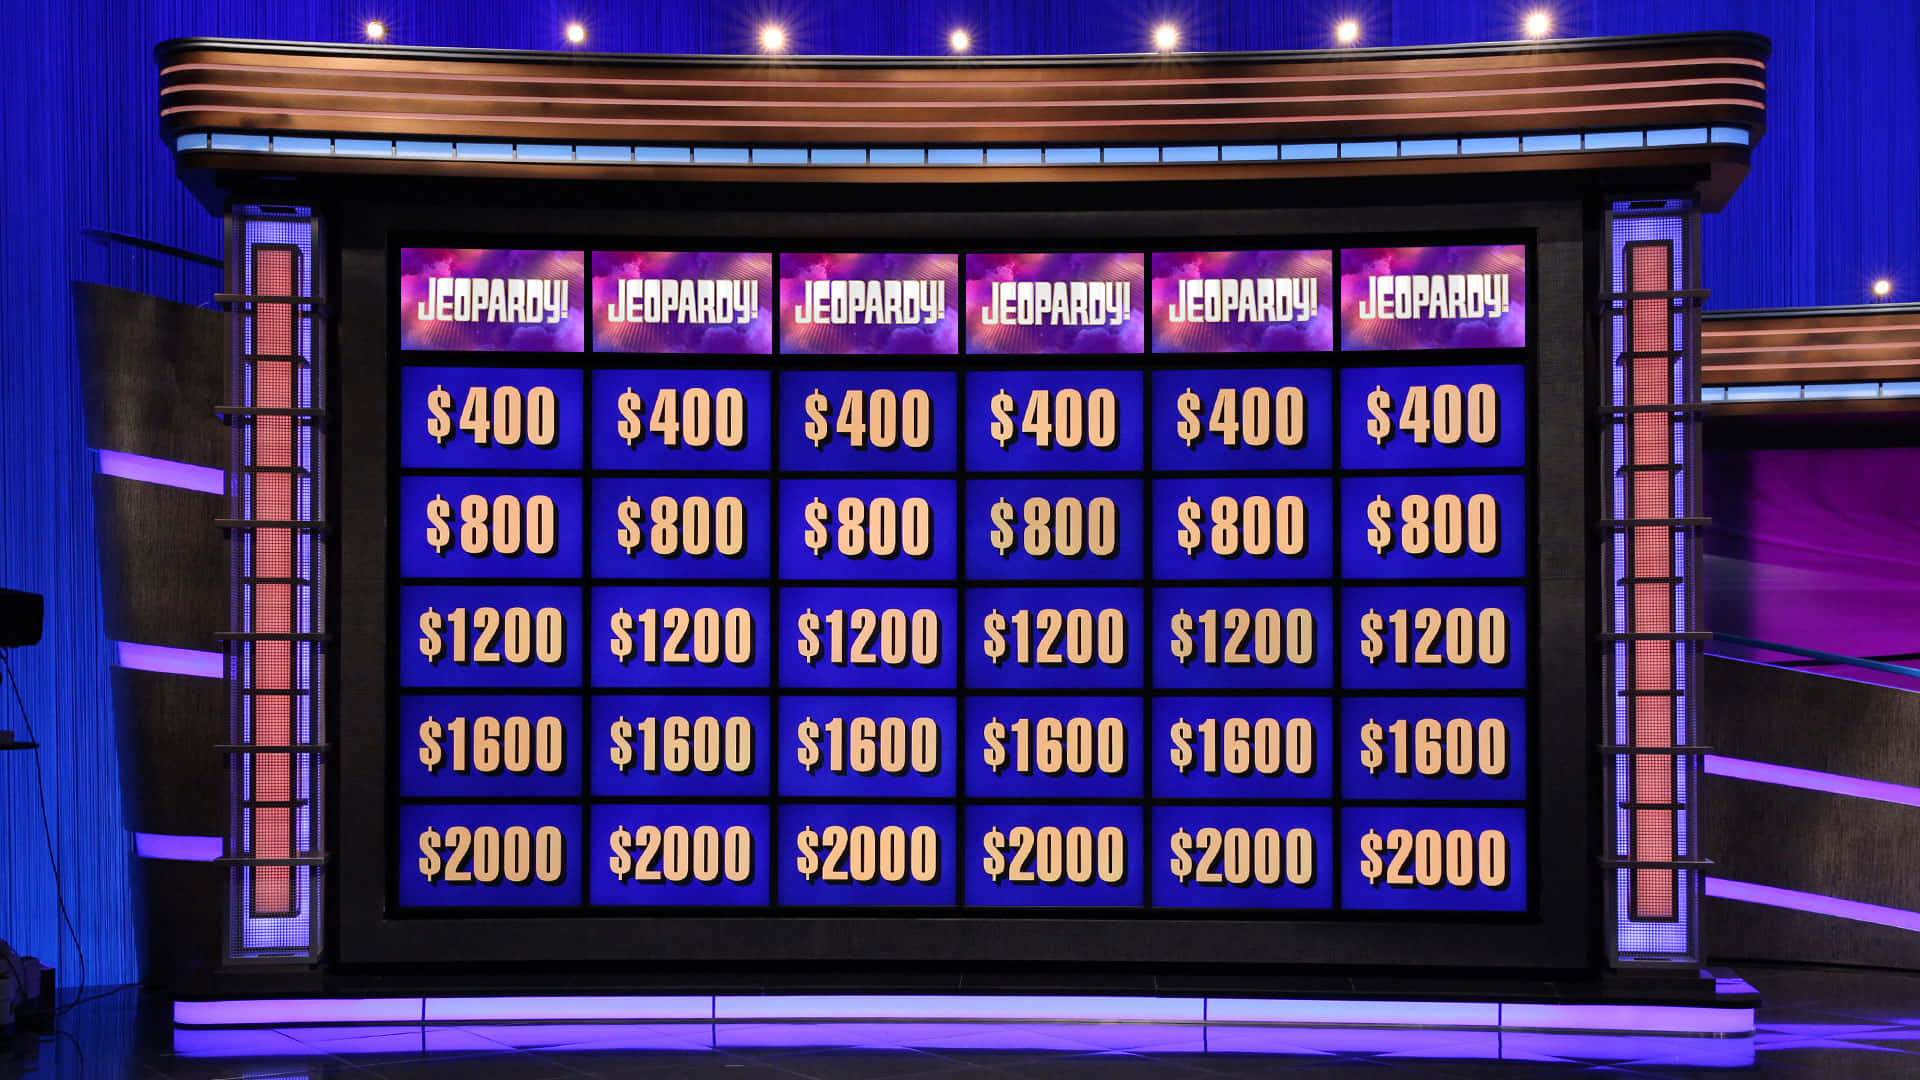 Jeopardy Game Show With A Purple And Blue Stage